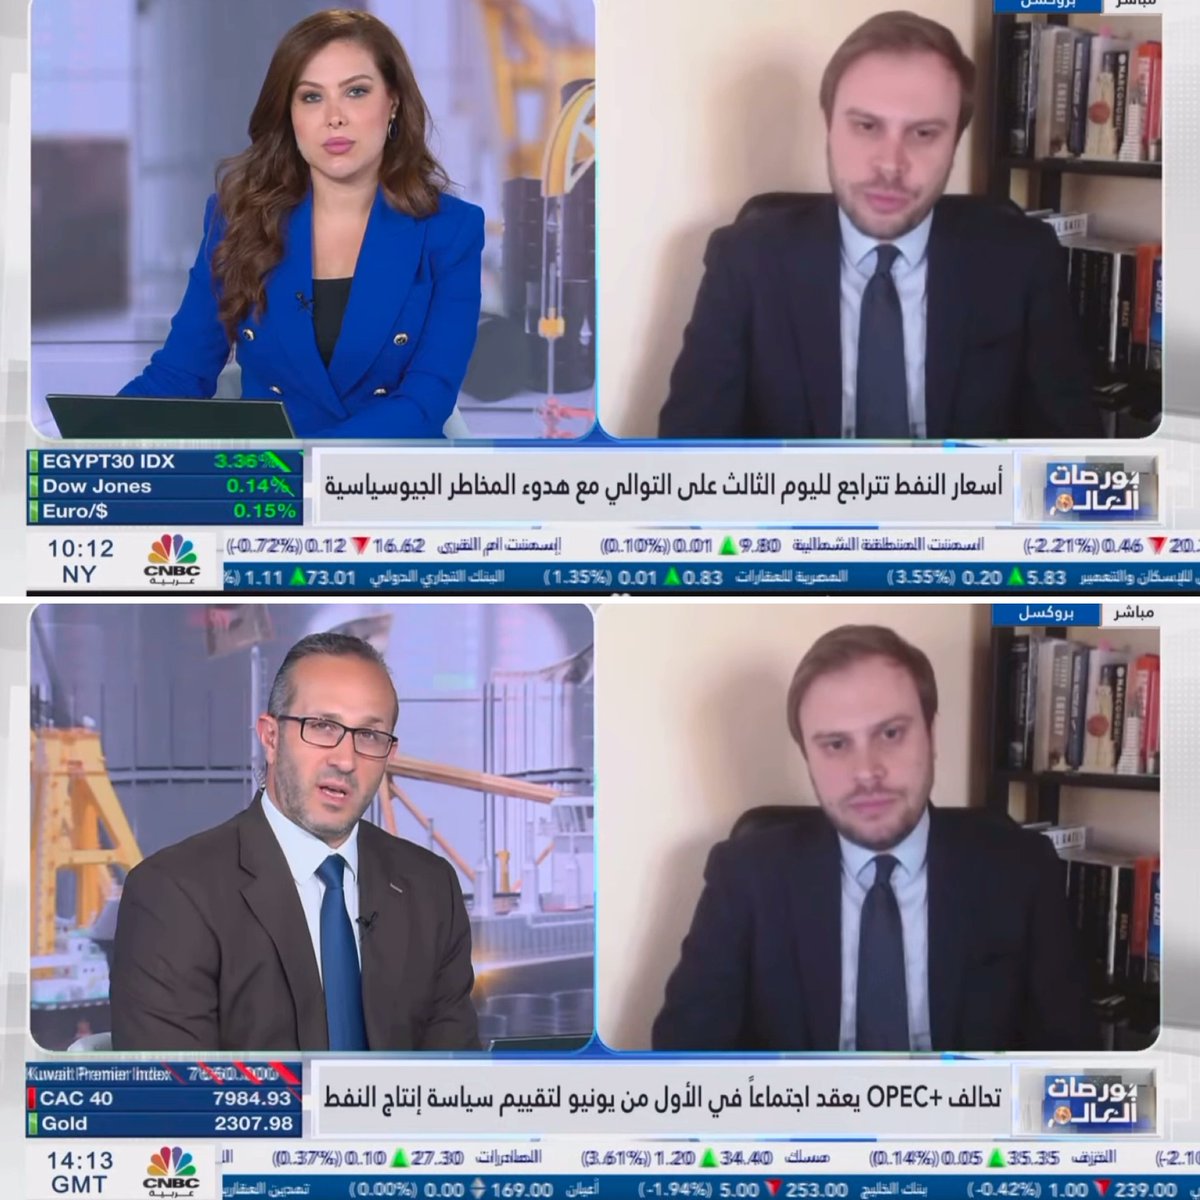 Back to @CNBCArabia yesterday, to join @MayKhadra and @husseinsayyed to discuss about the latest developments in global oil markets. Thank you for the invitation, Riadh Saady. Despite a technical/connection glitch, we were able to discuss potential future developments for…